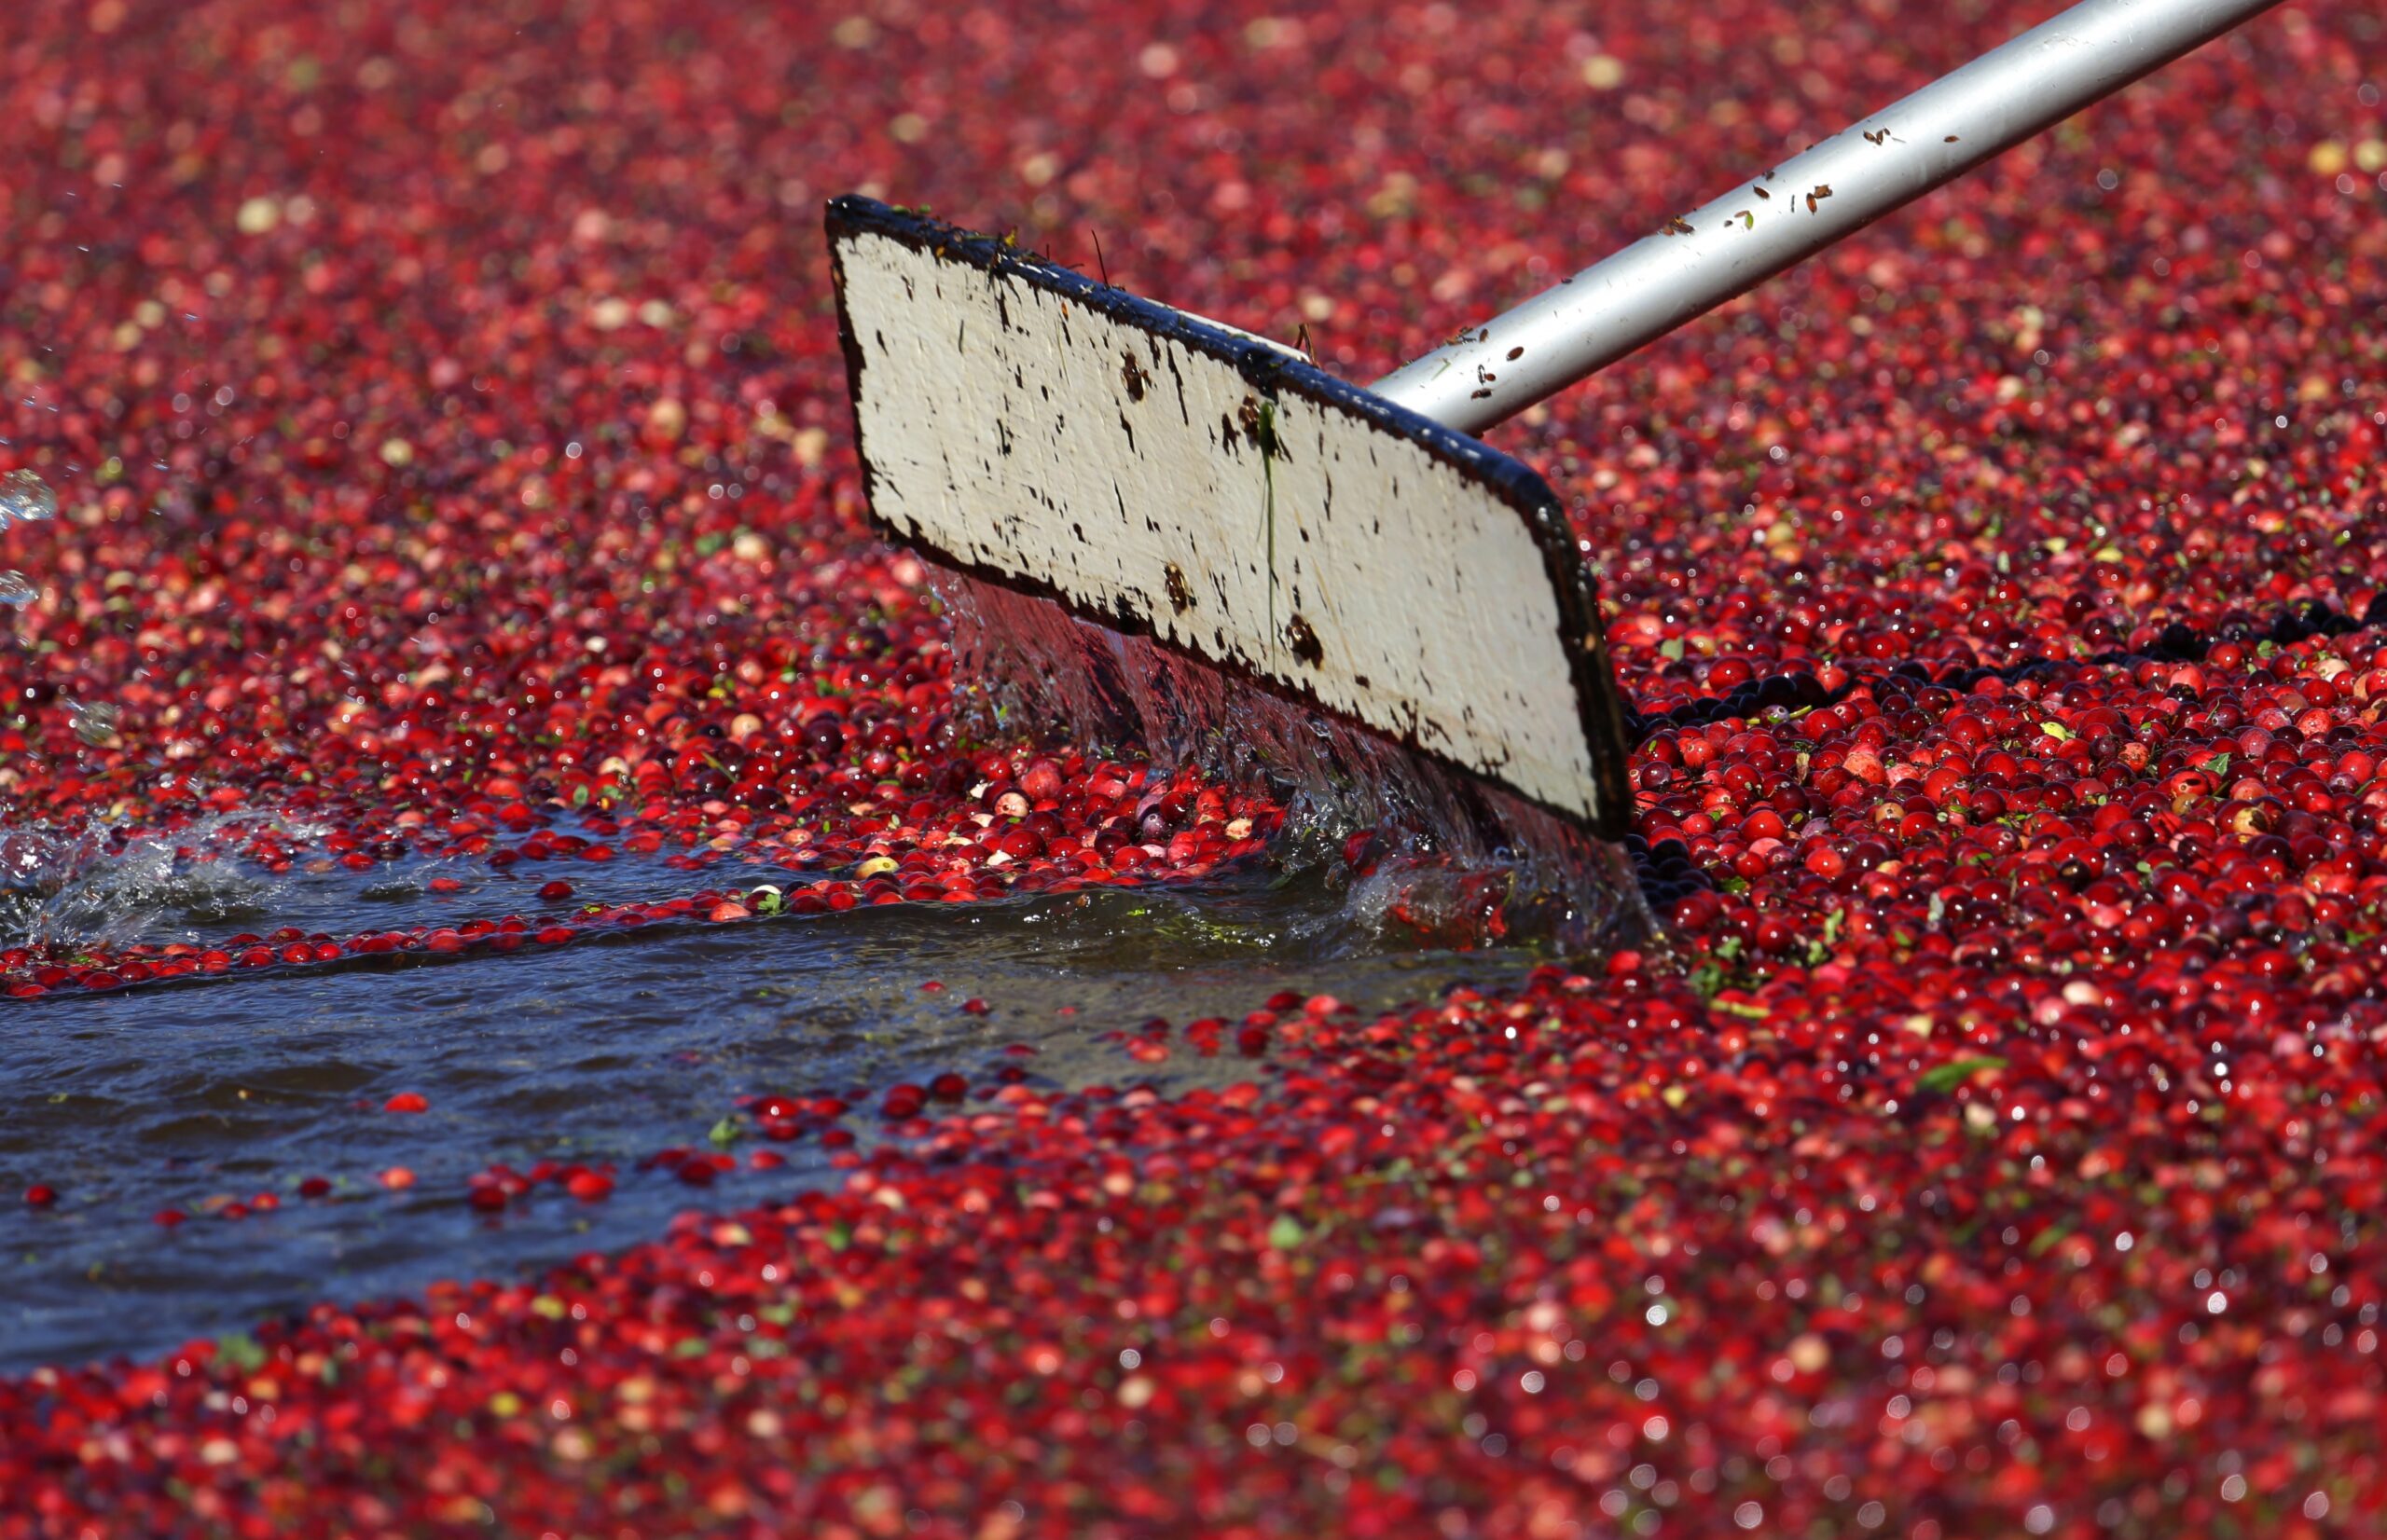 Tribe and lakes association claim cranberry operation is violating the Clean Water Act